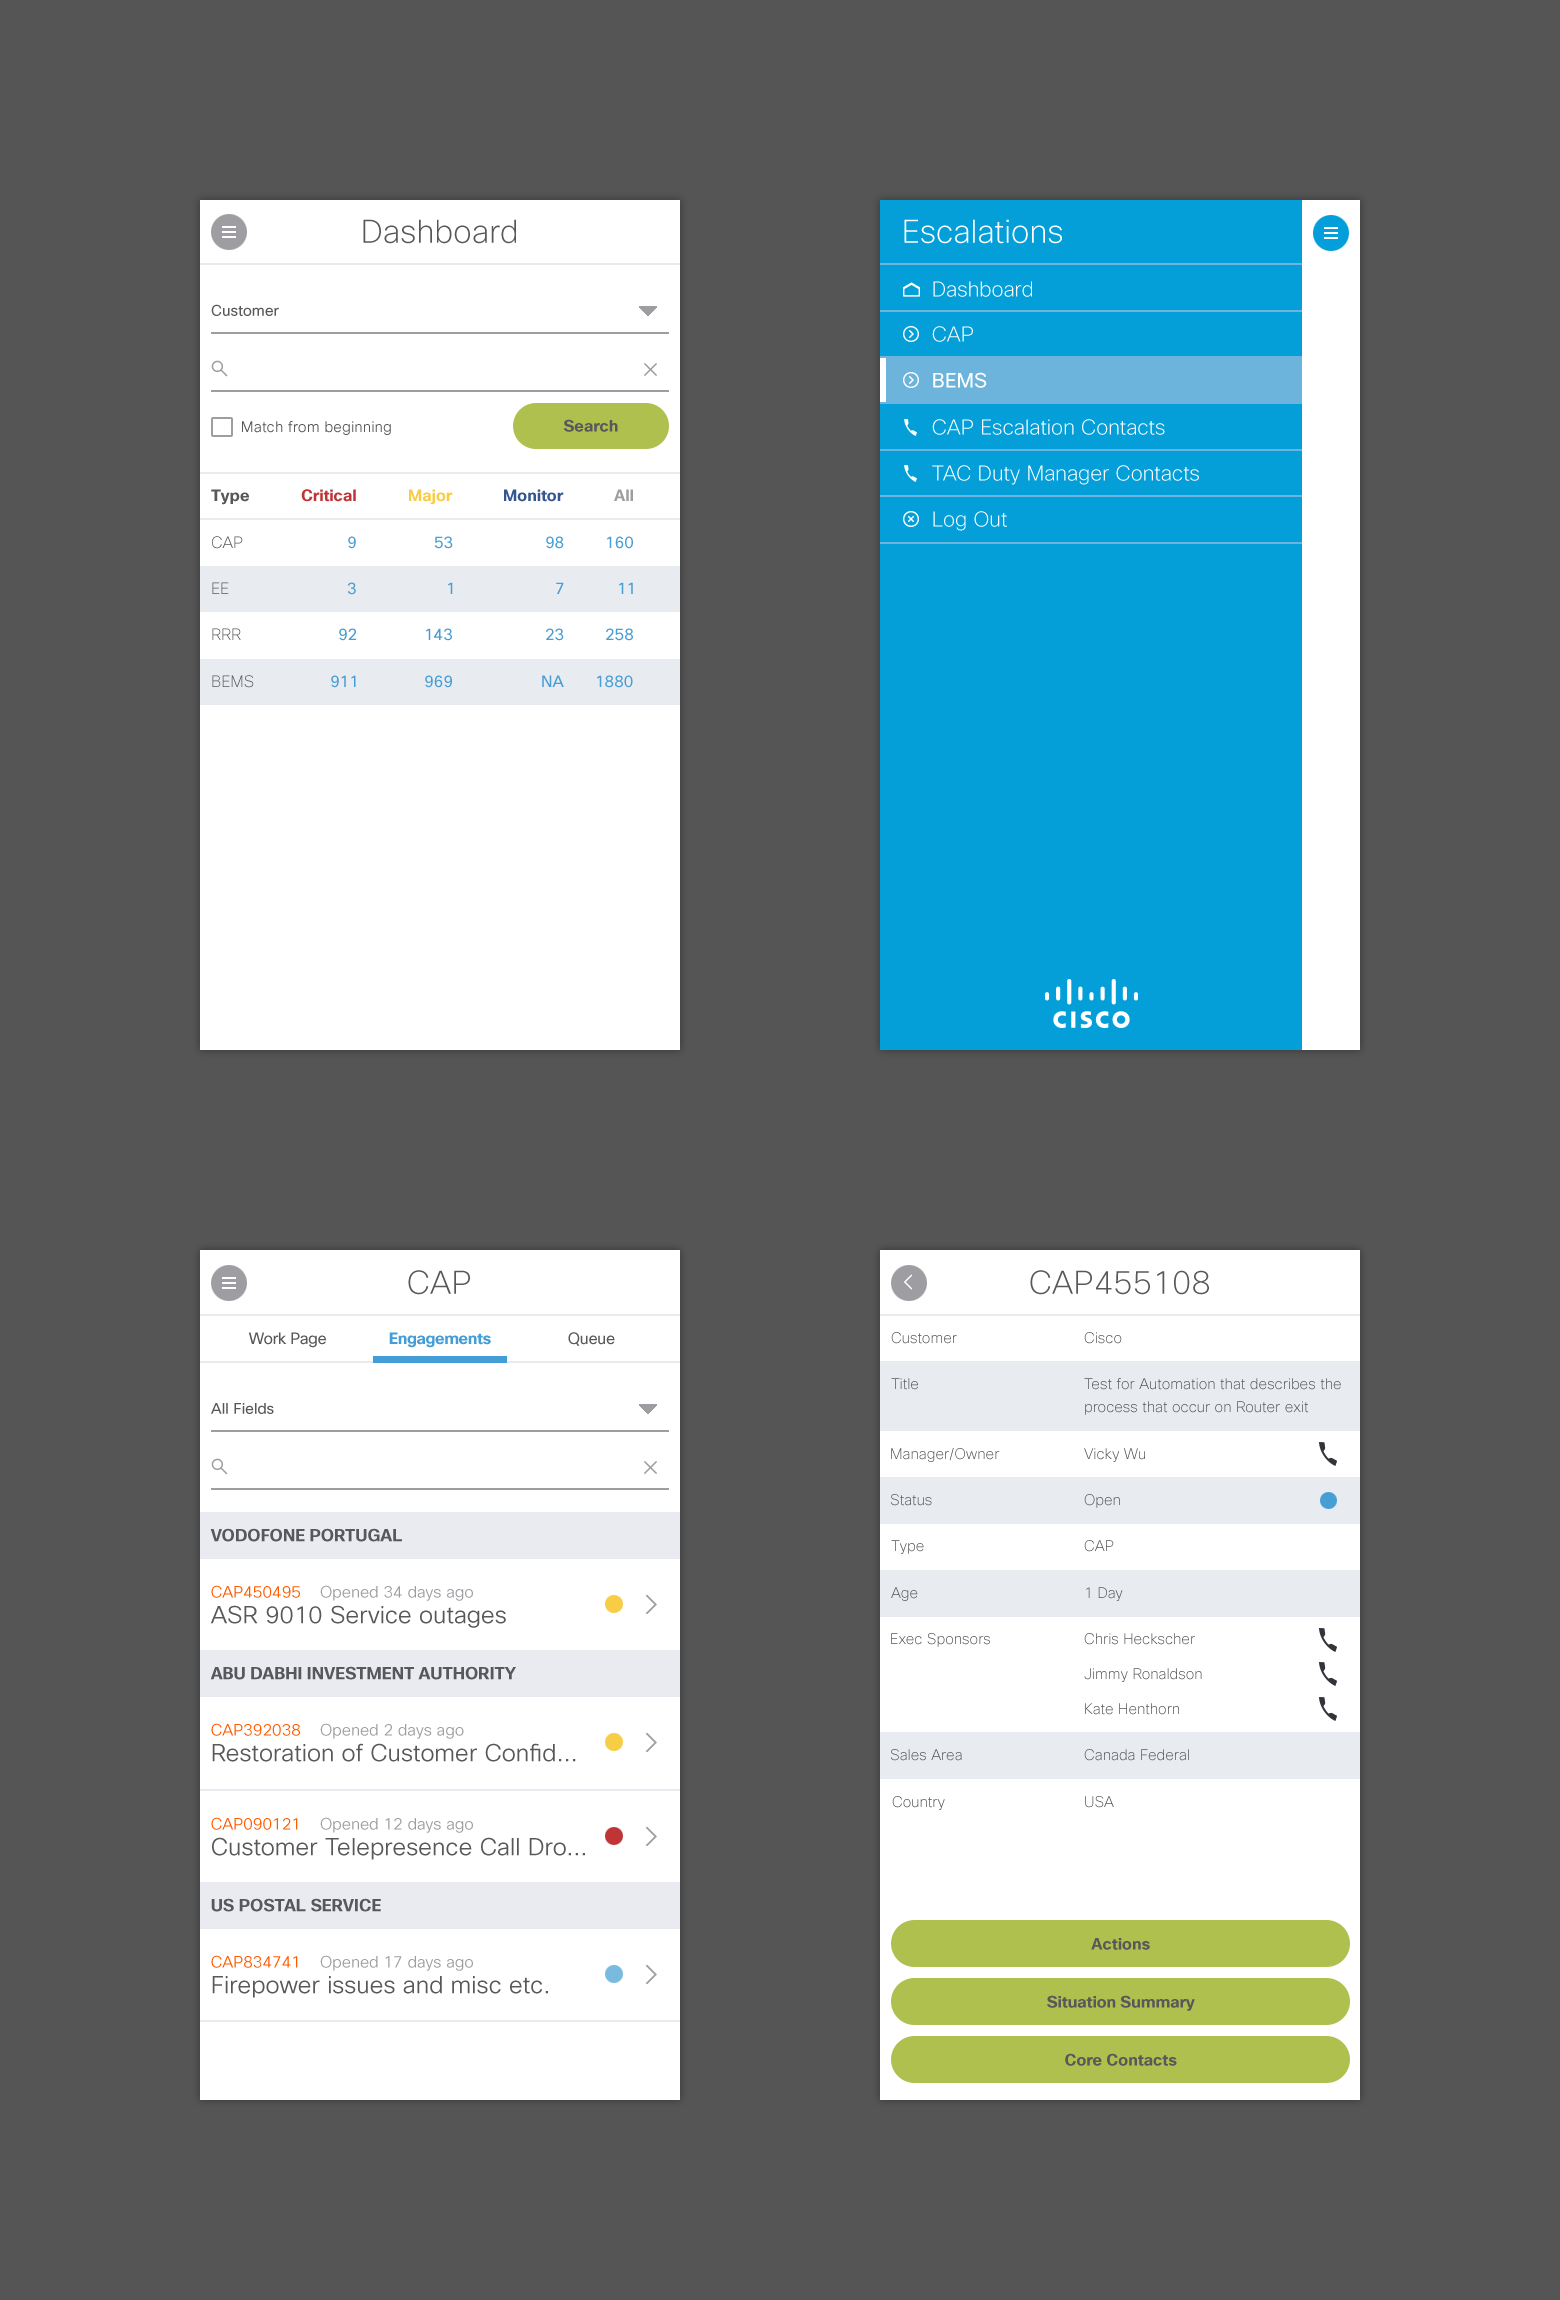 Four atlantic mobile mockups. Each screen depicts a different part of a escalation management system